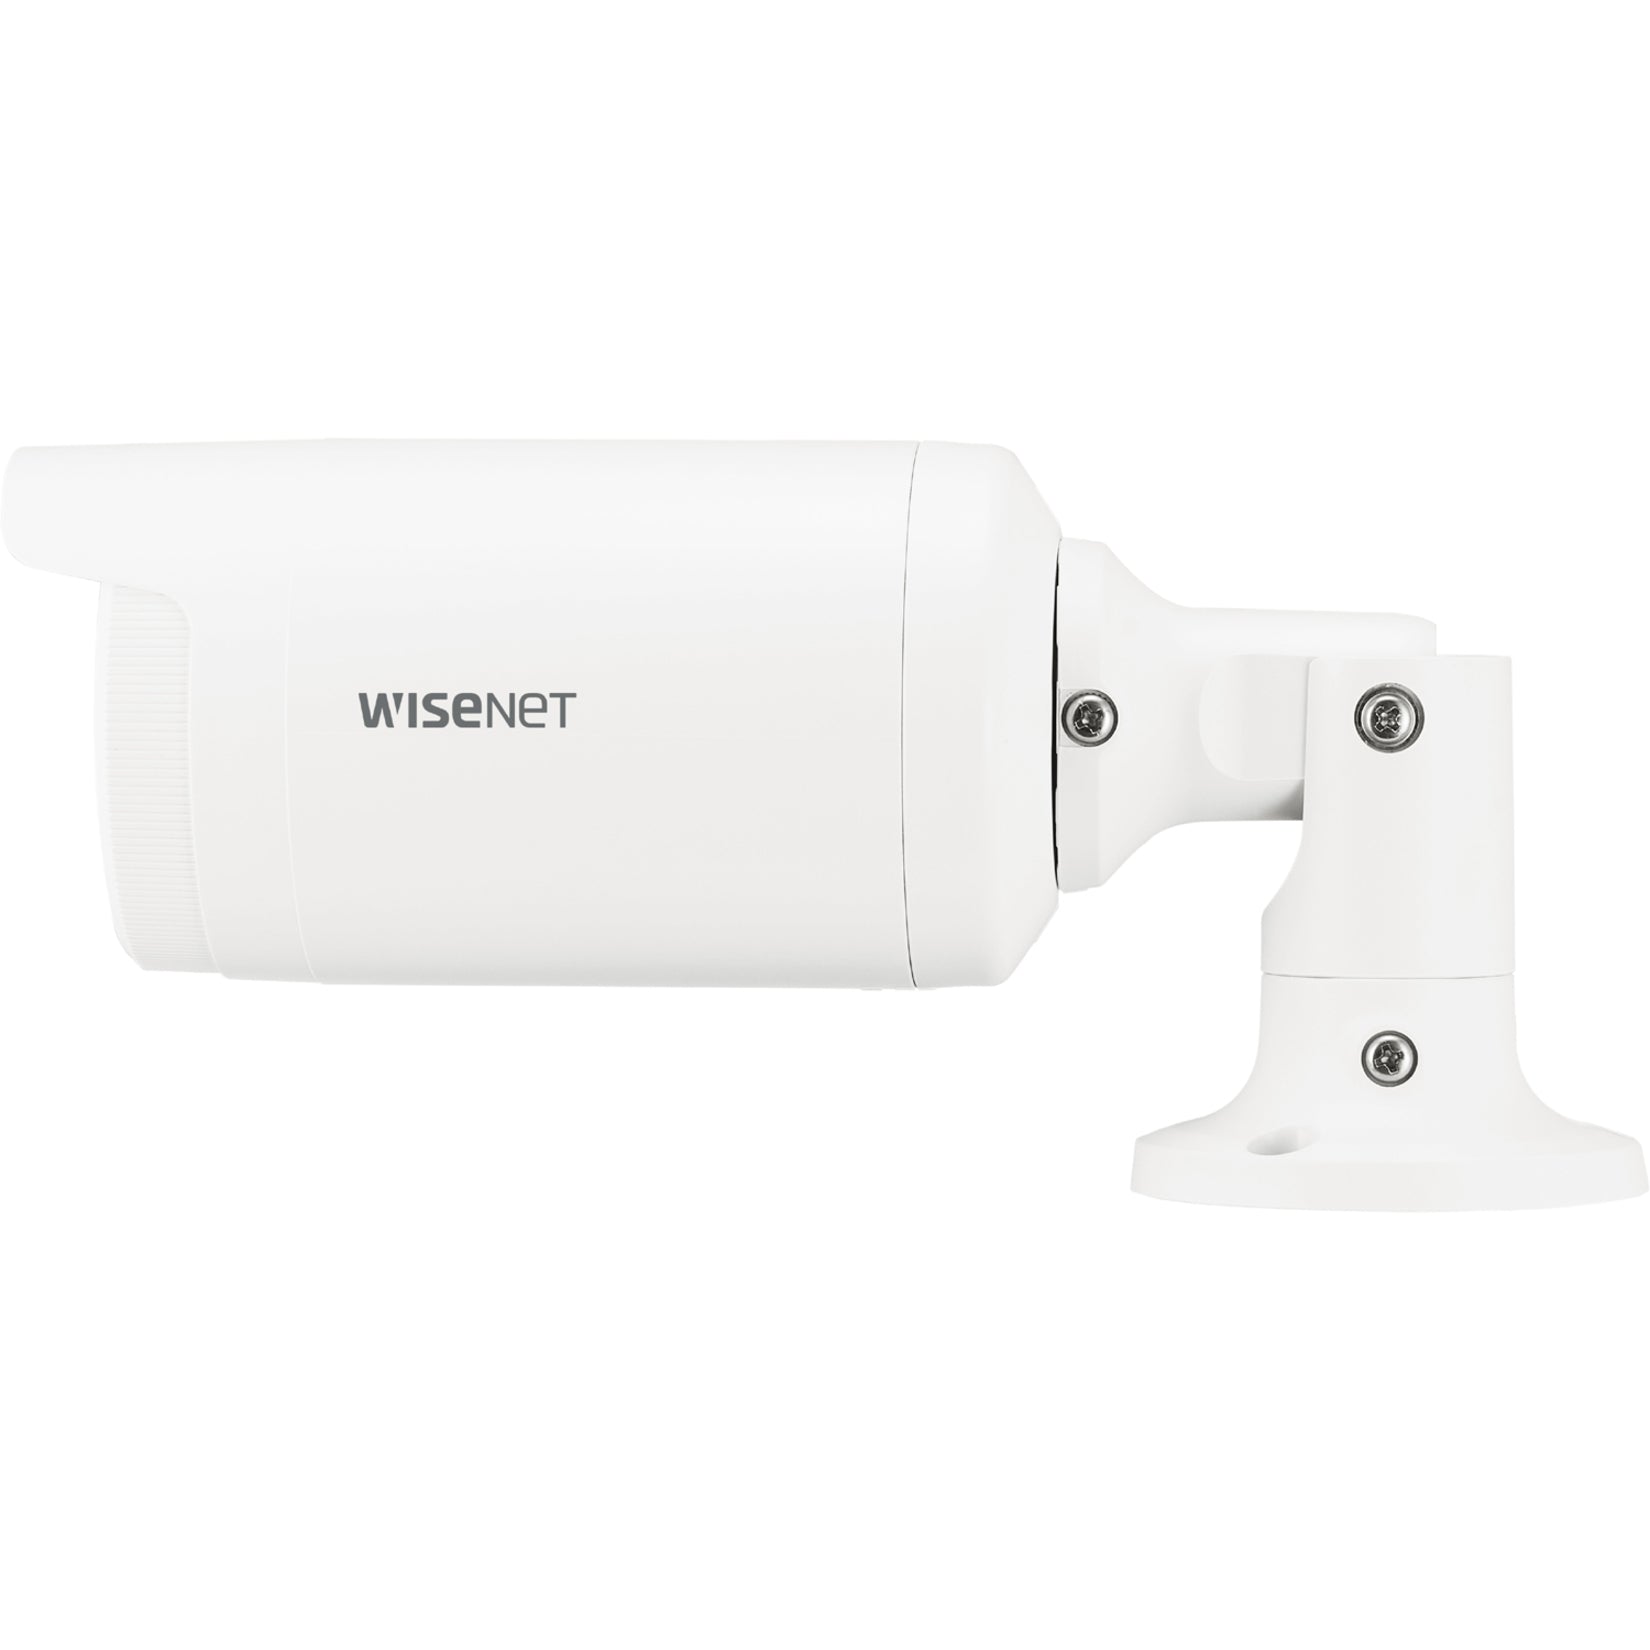 Wisenet ANO-L7012R 4MP IR Bullet Network Camera, Color, 2560 x 1440, SD Card Local Storage, Motion Detection, IP66